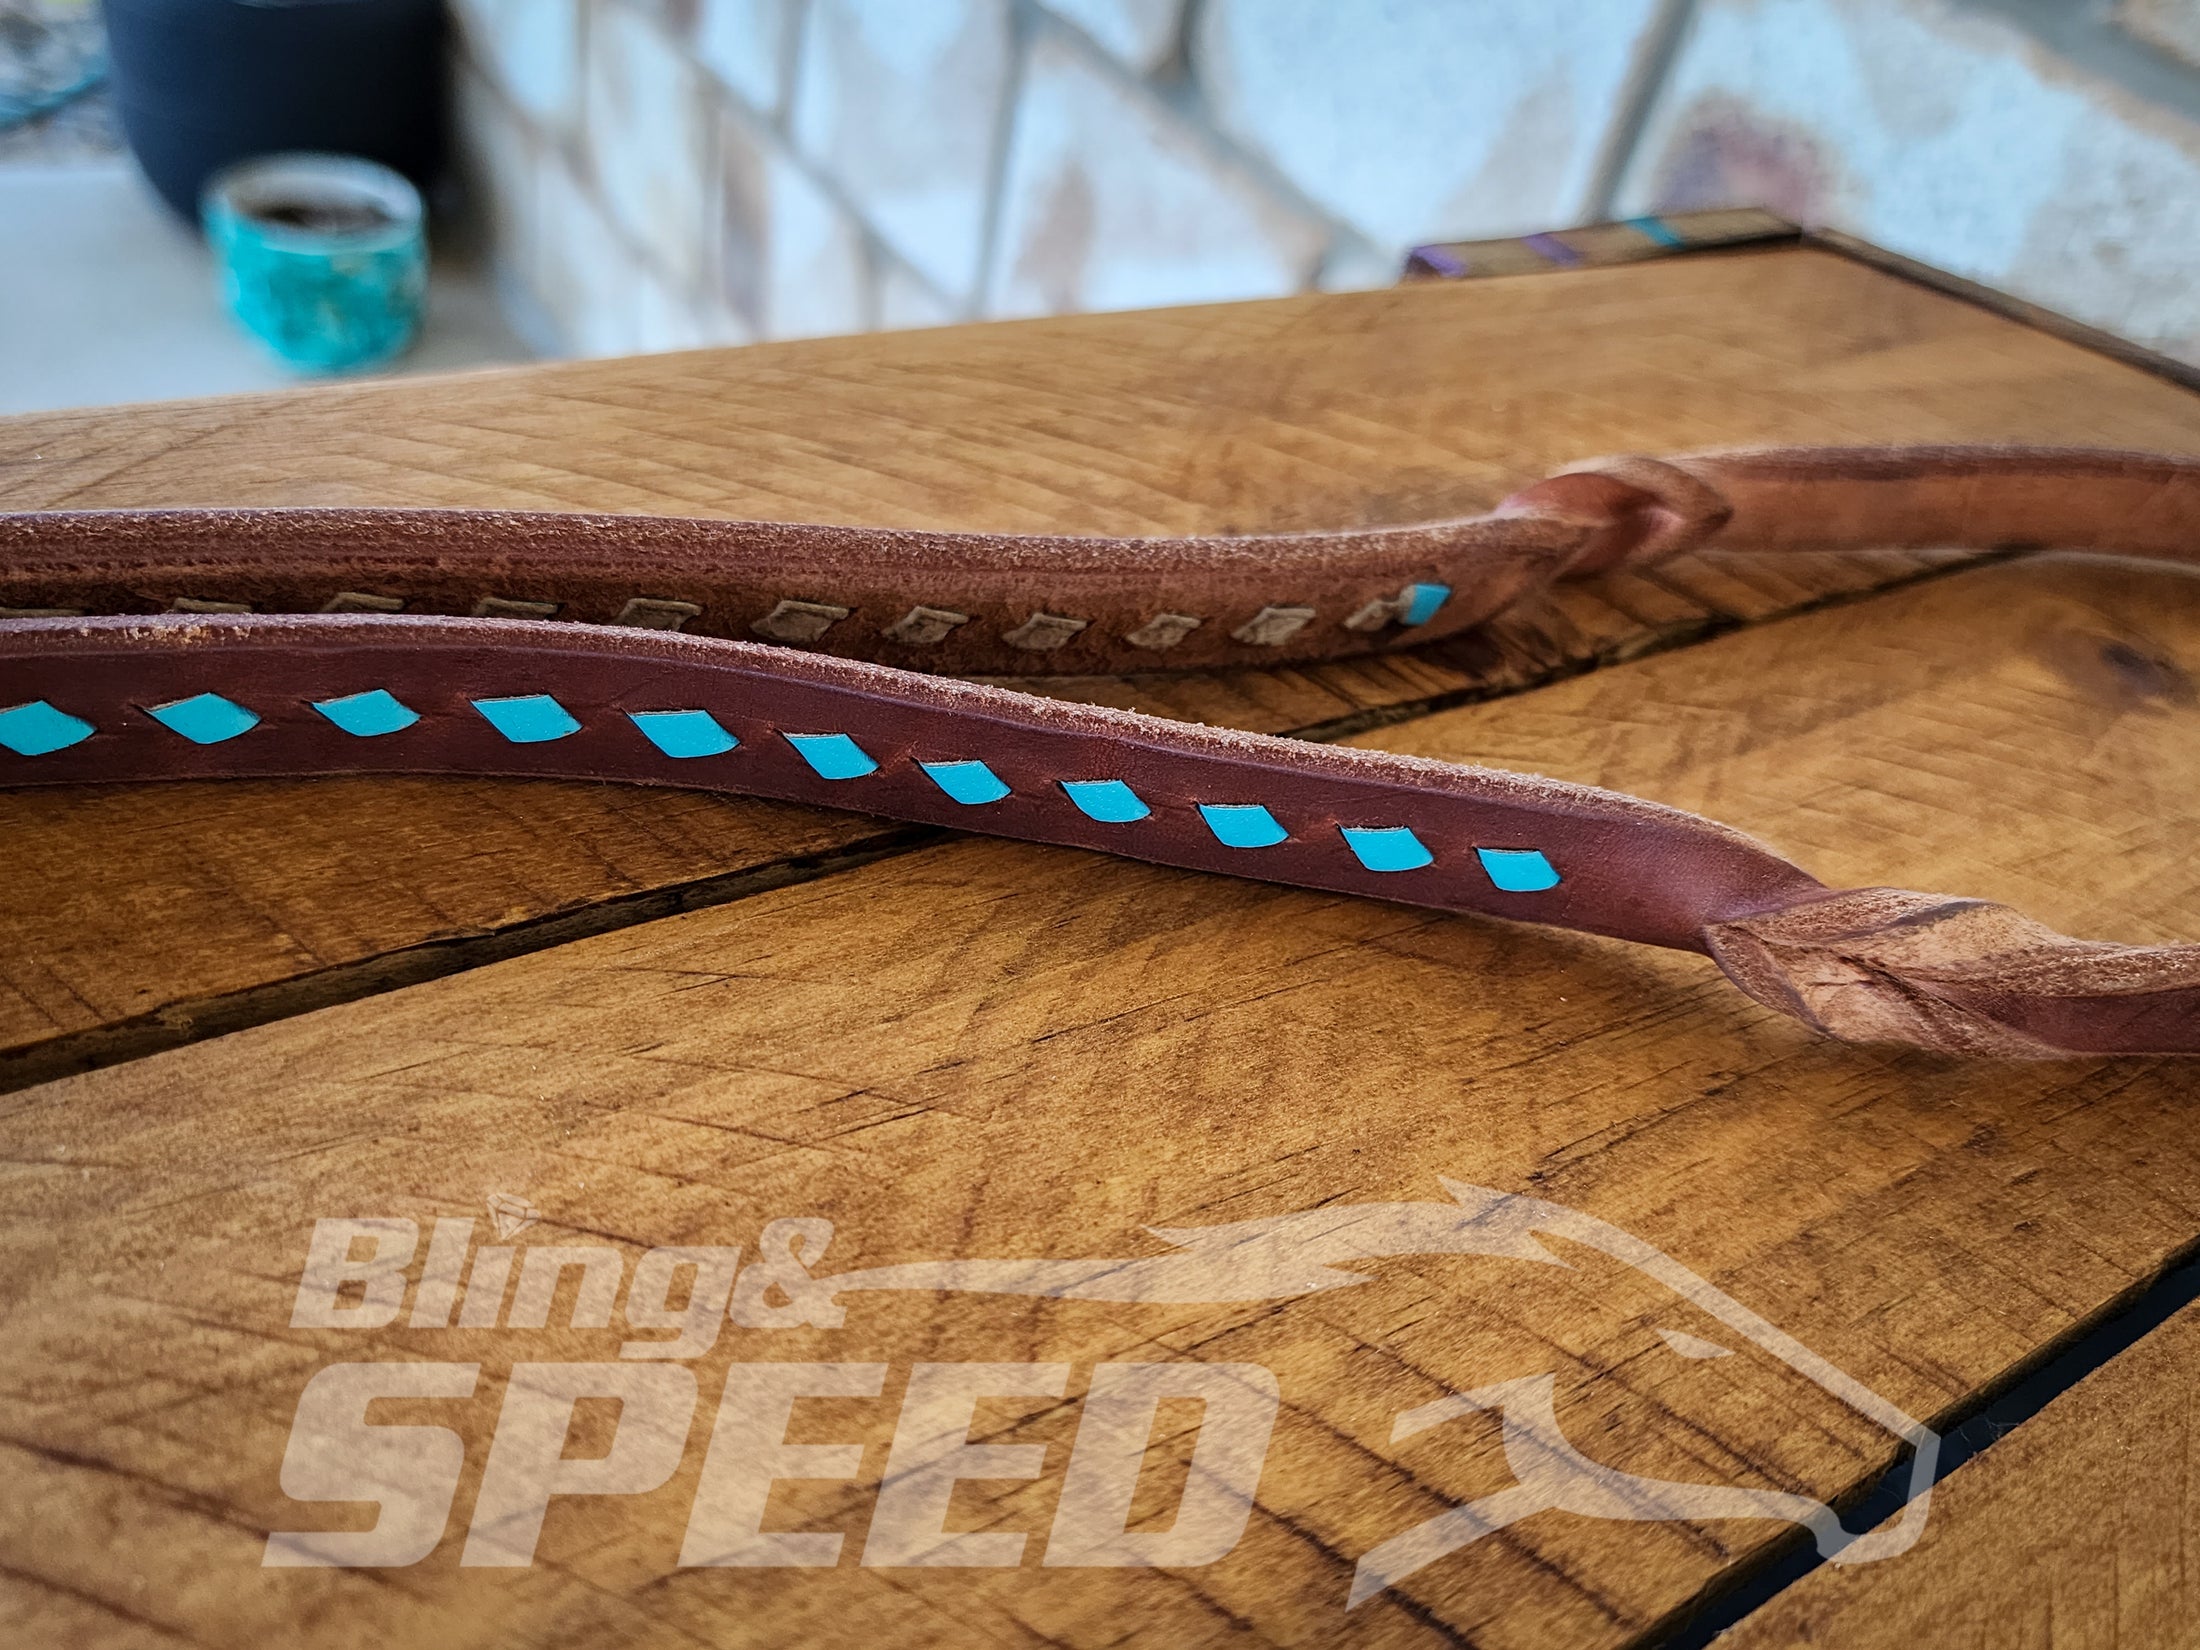 Bling & Speed Twisted Bloodknot Buckstitched Barrel Reins - Turquoise (7977754722542)